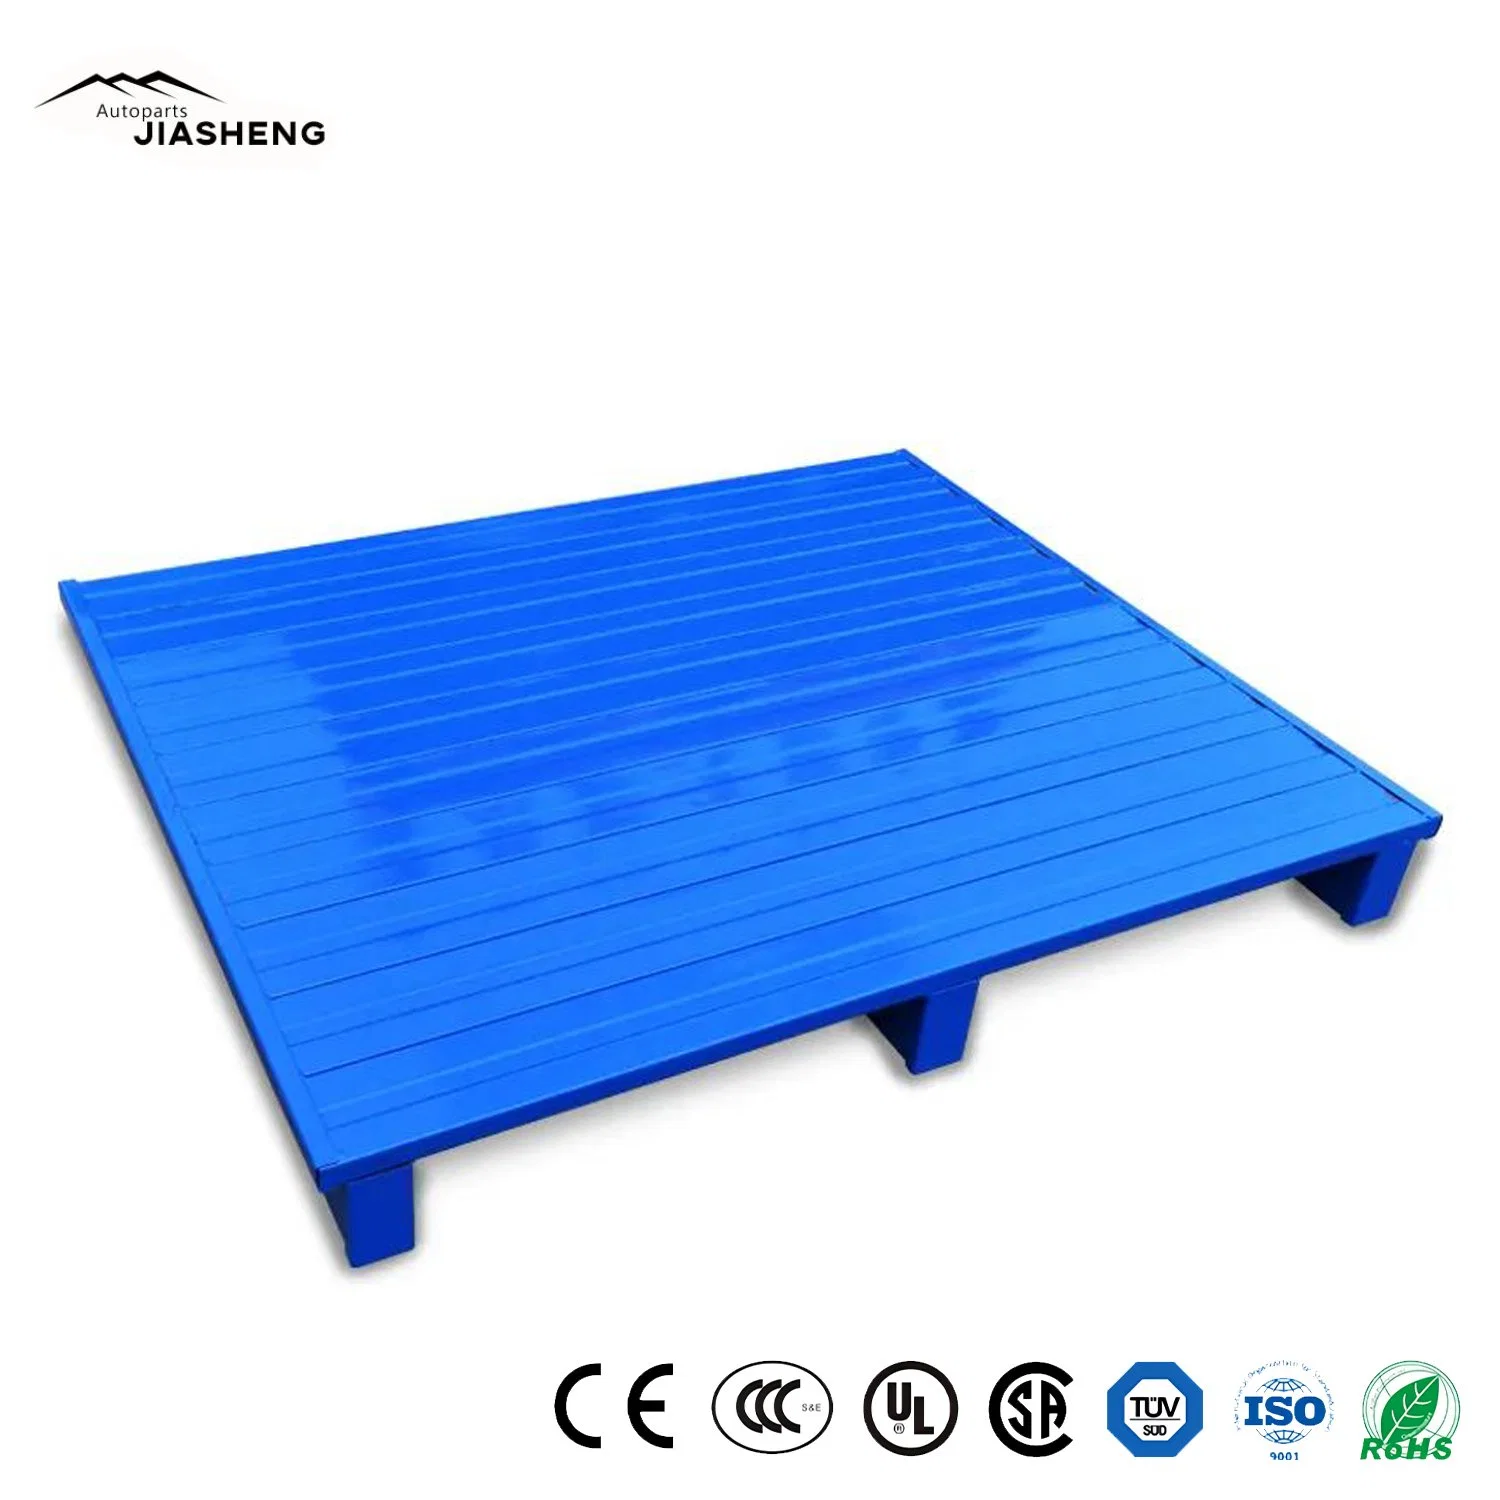 Chinese Manufacturers Direct Factory of Carbon Steel Stainless Steel Aluminum Stacking Pallets Global Sell